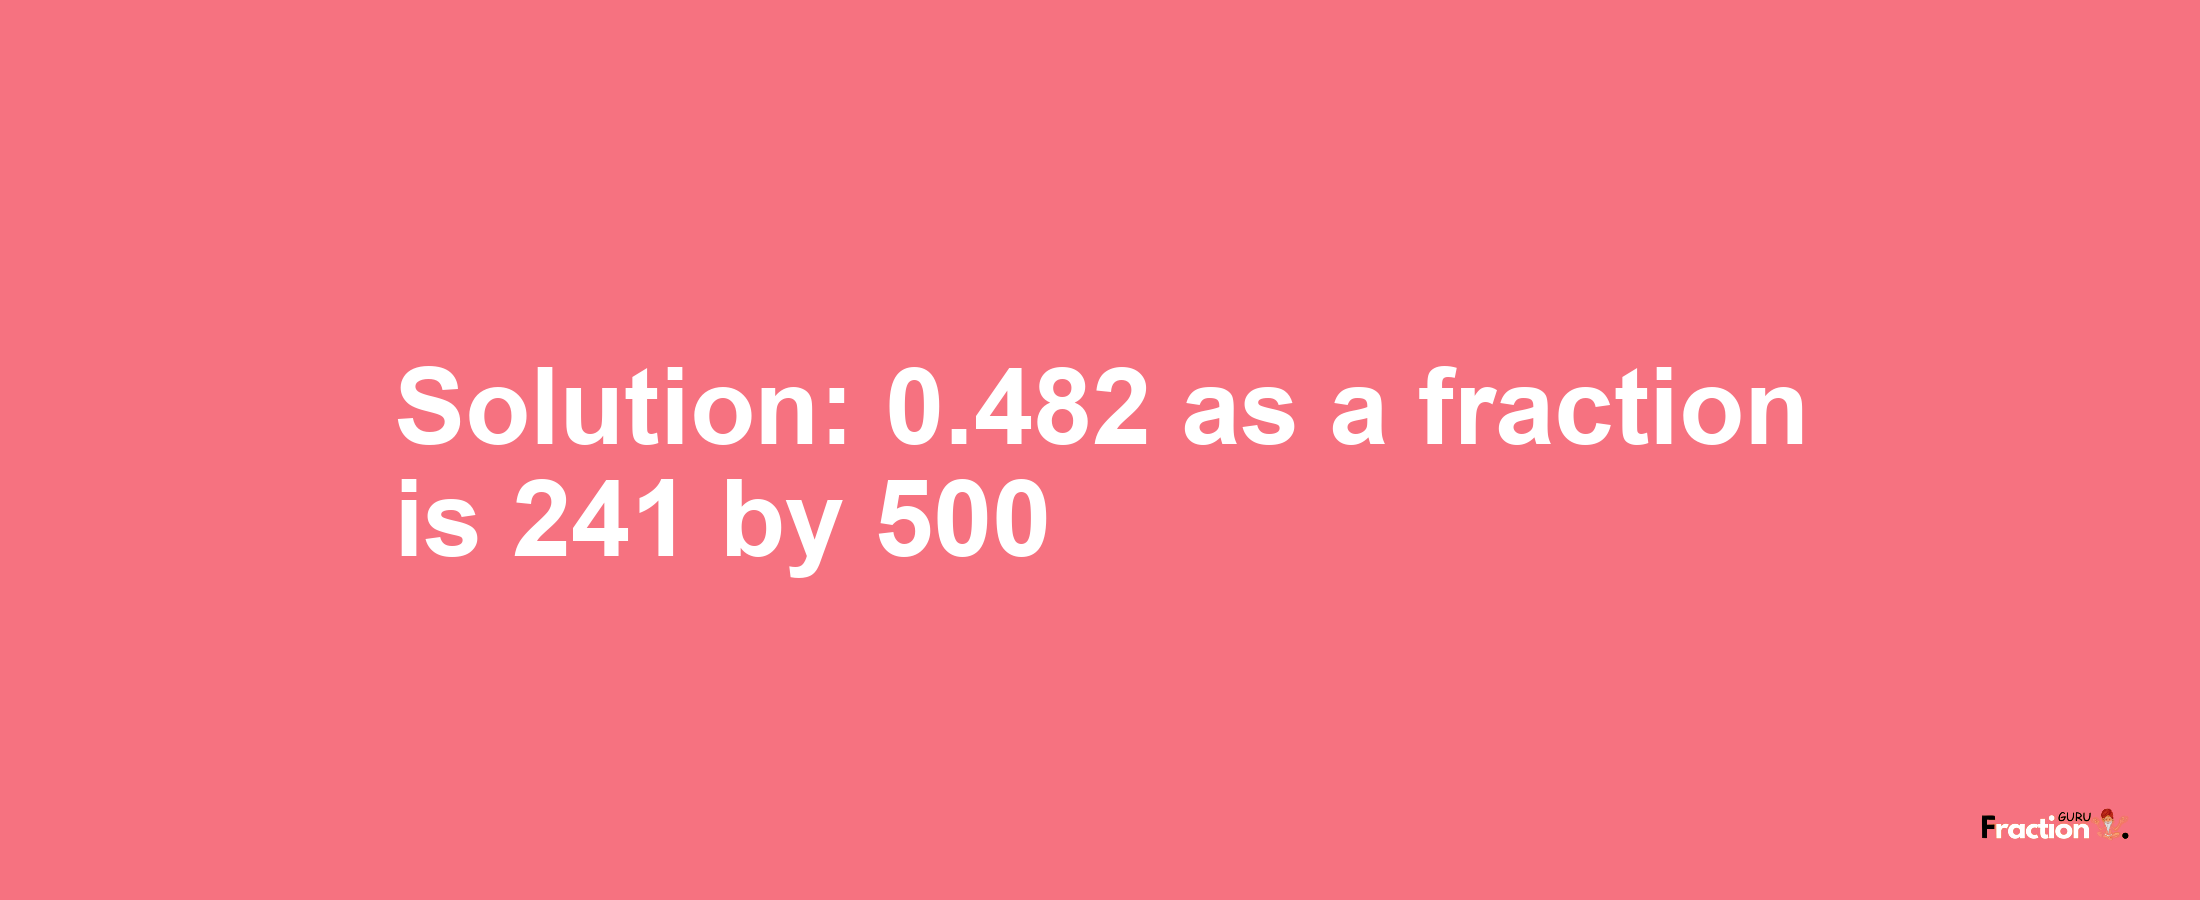 Solution:0.482 as a fraction is 241/500